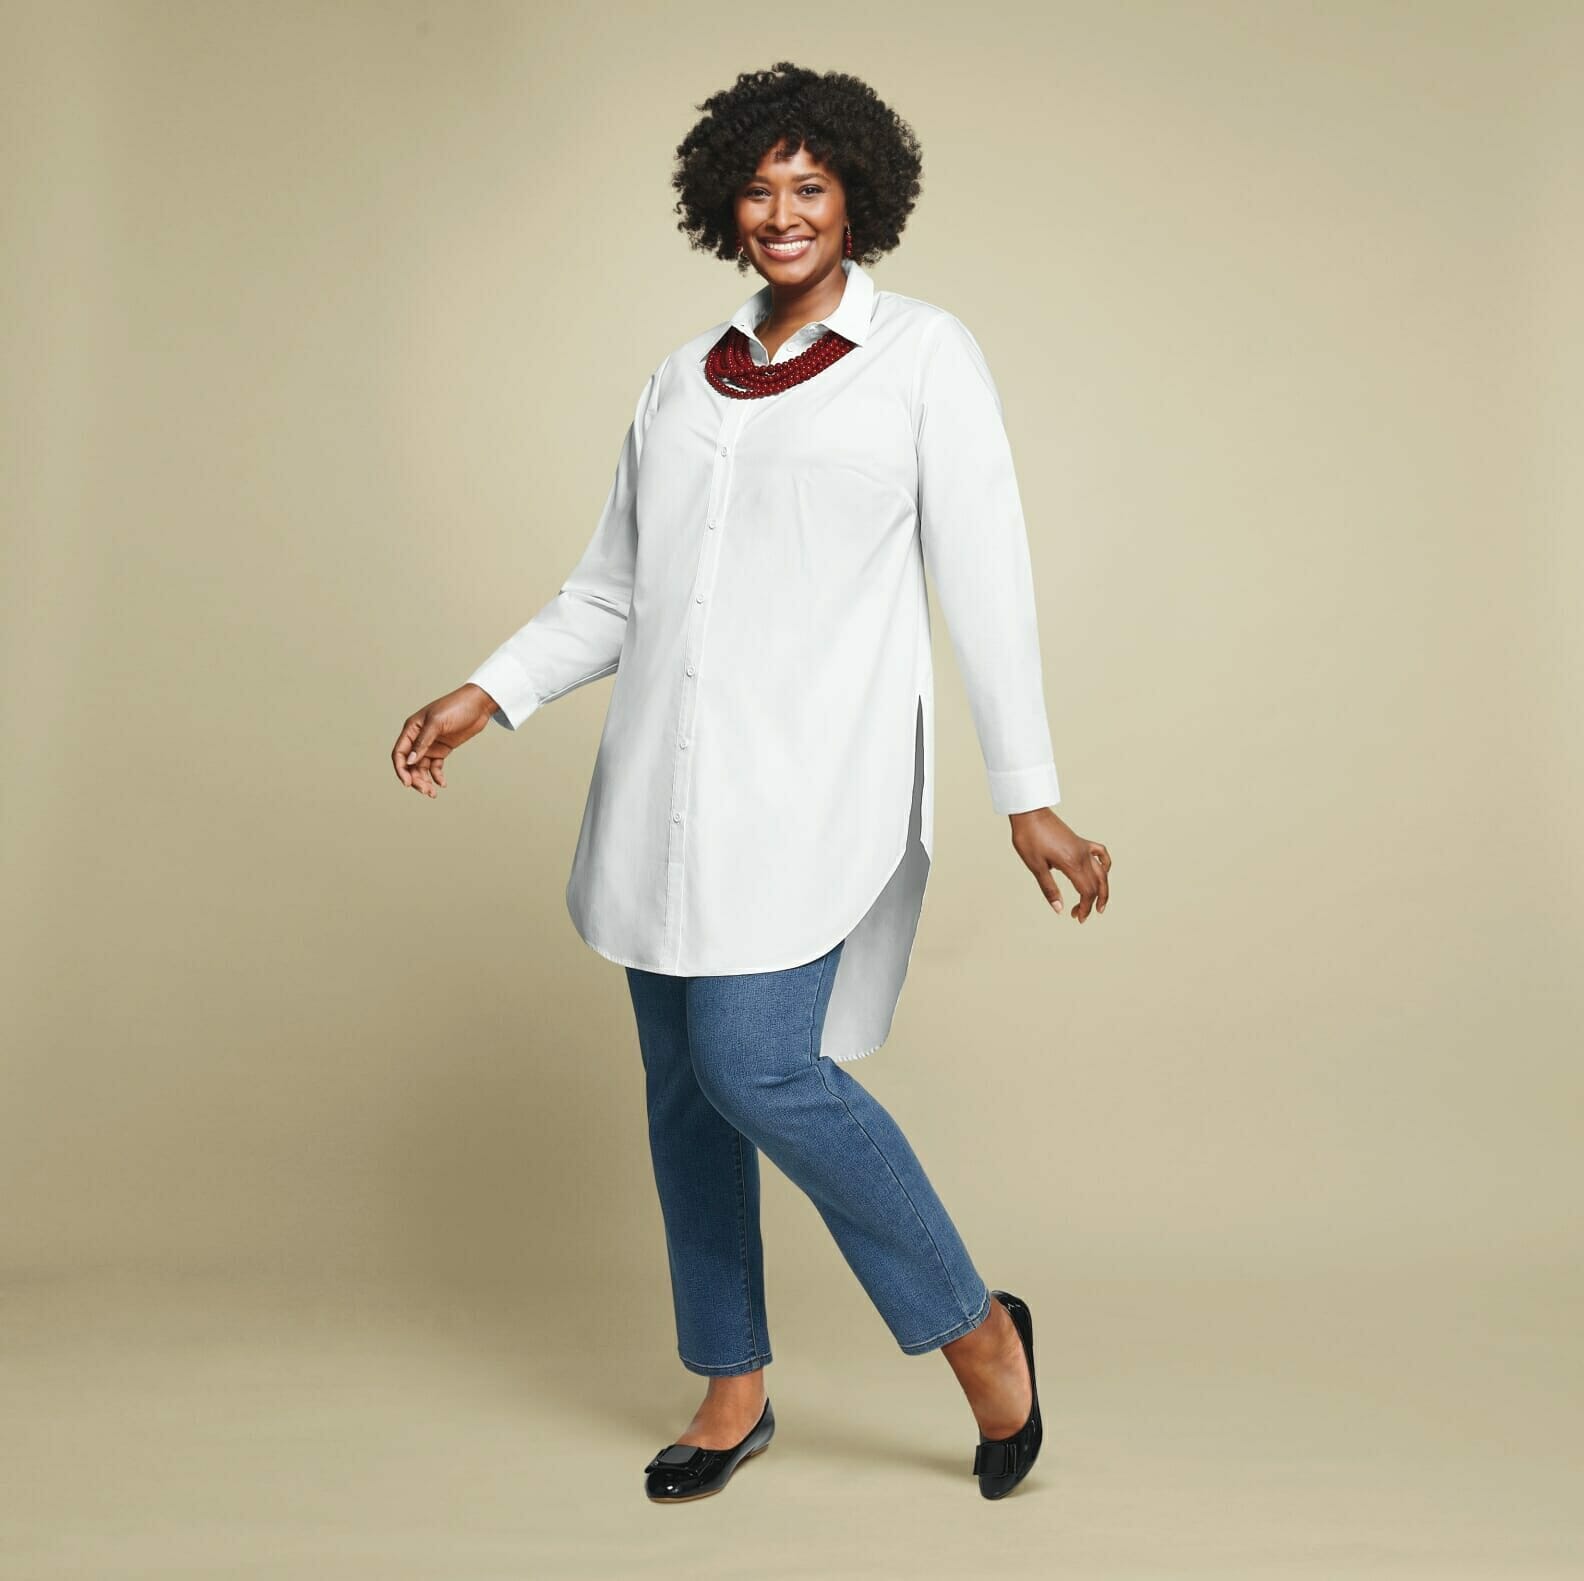 Plus size model with a white long-sleeve blouse with jeans and a red beaded necklace.